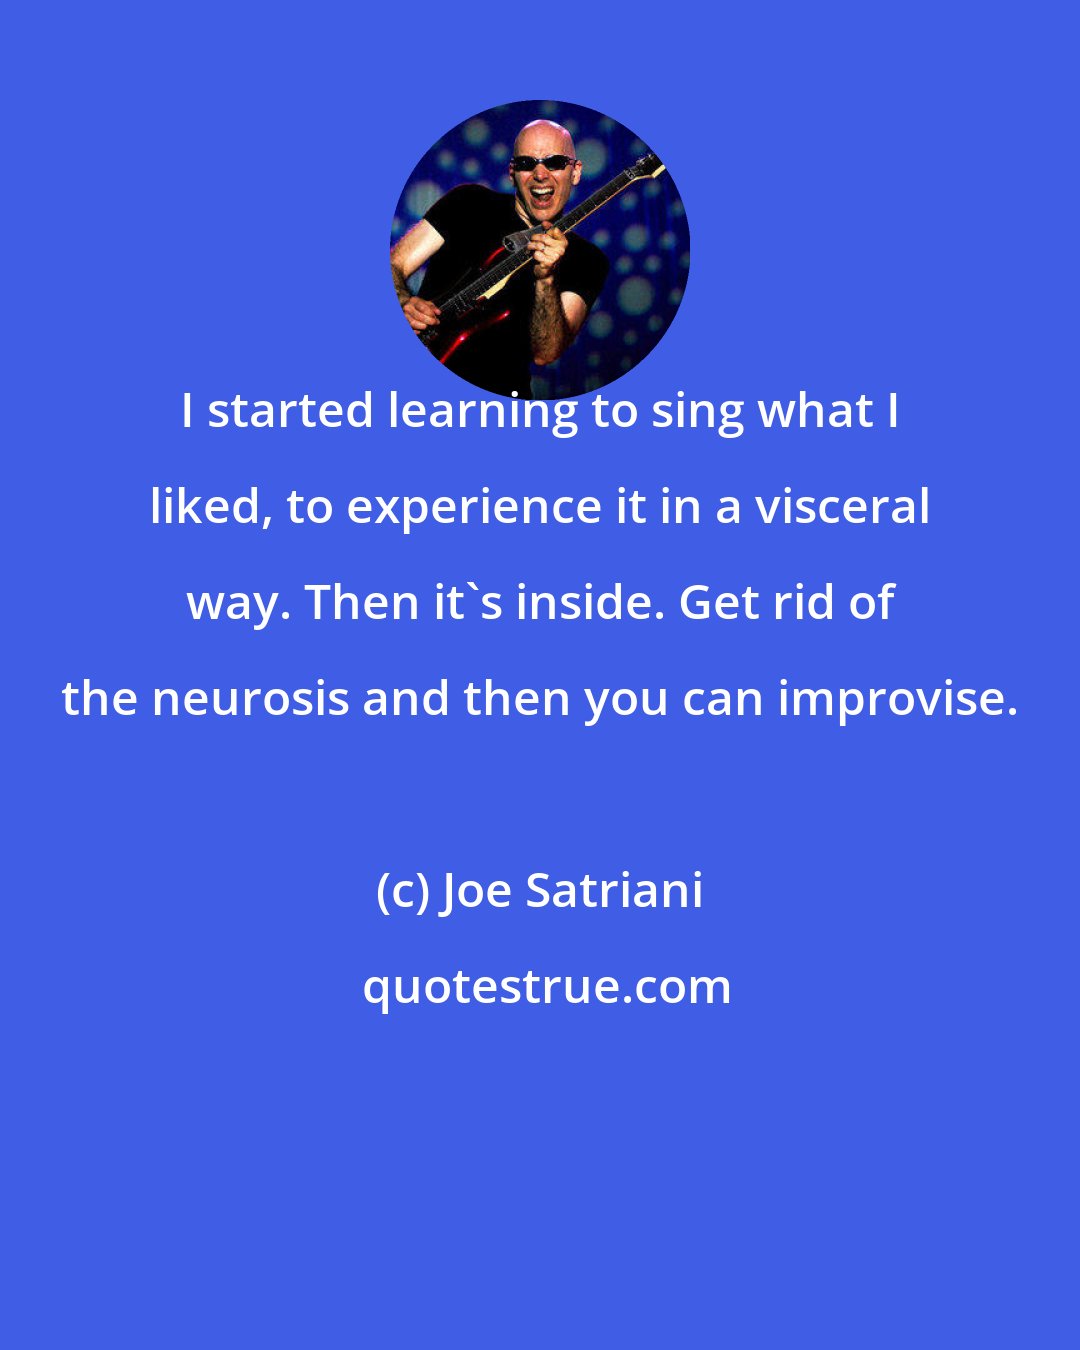 Joe Satriani: I started learning to sing what I liked, to experience it in a visceral way. Then it's inside. Get rid of the neurosis and then you can improvise.